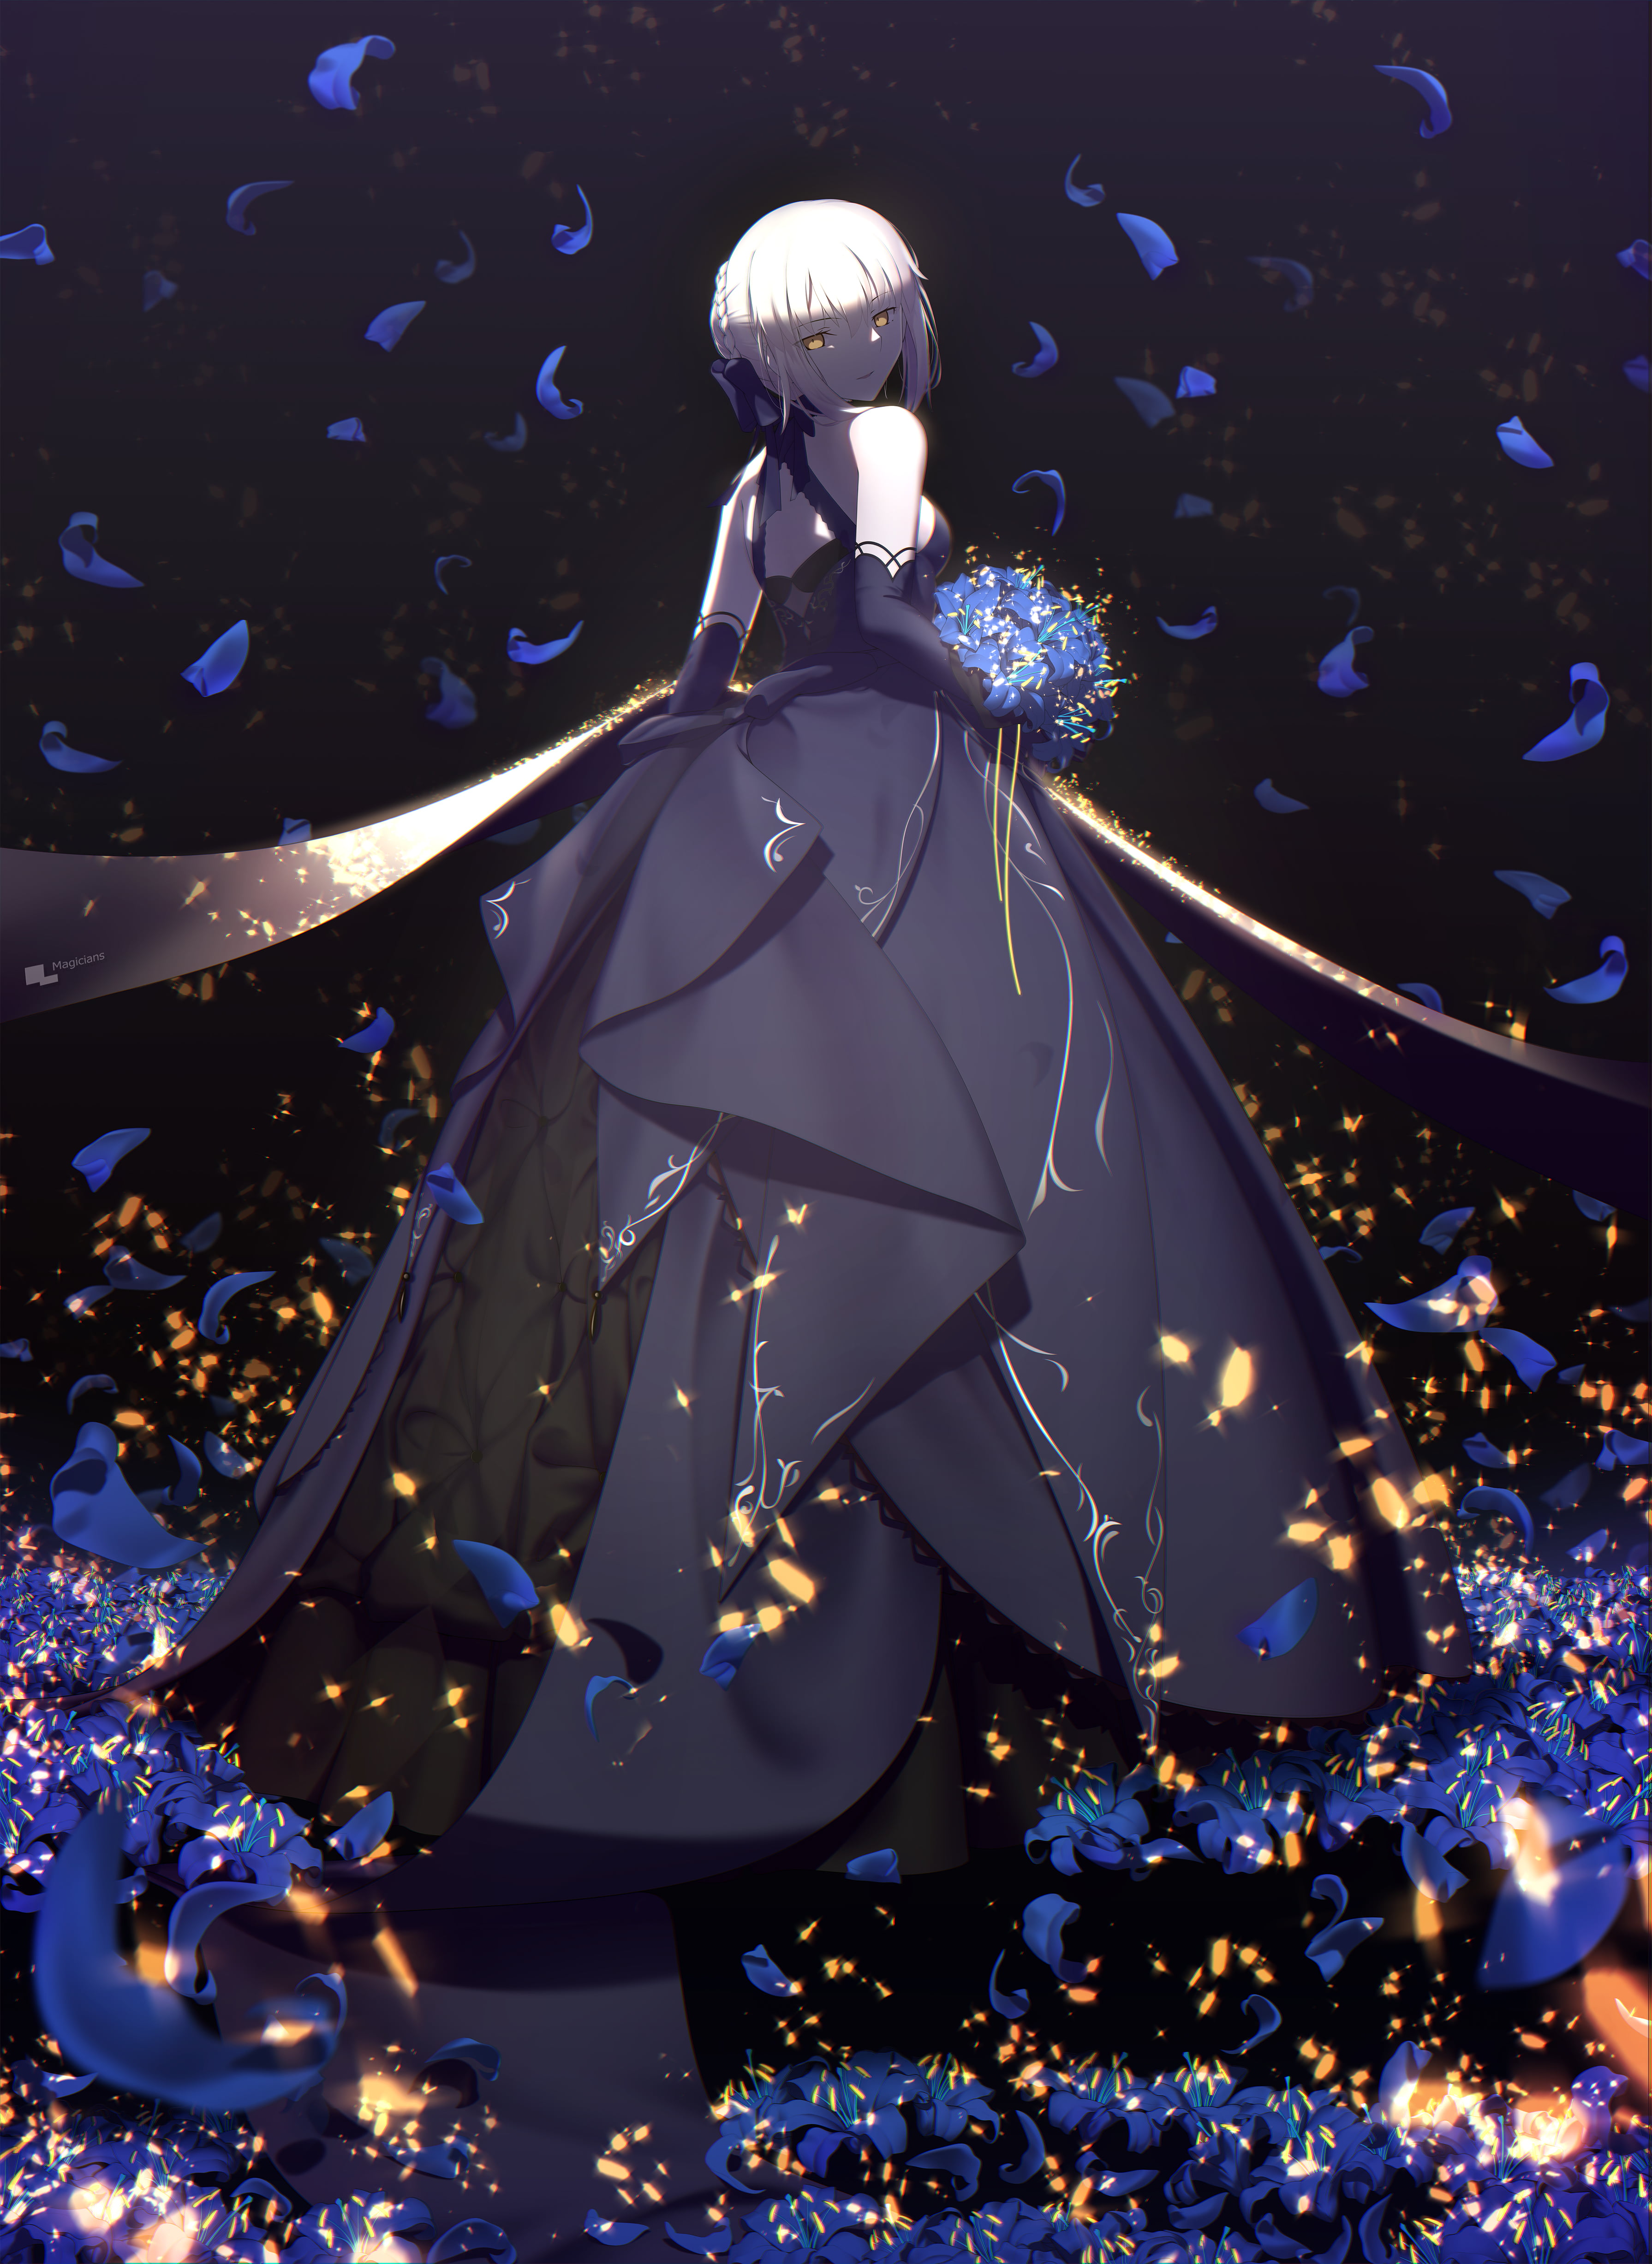 Black and blue floral print dress, Fate/Grand Order, Fate/Stay Night ...